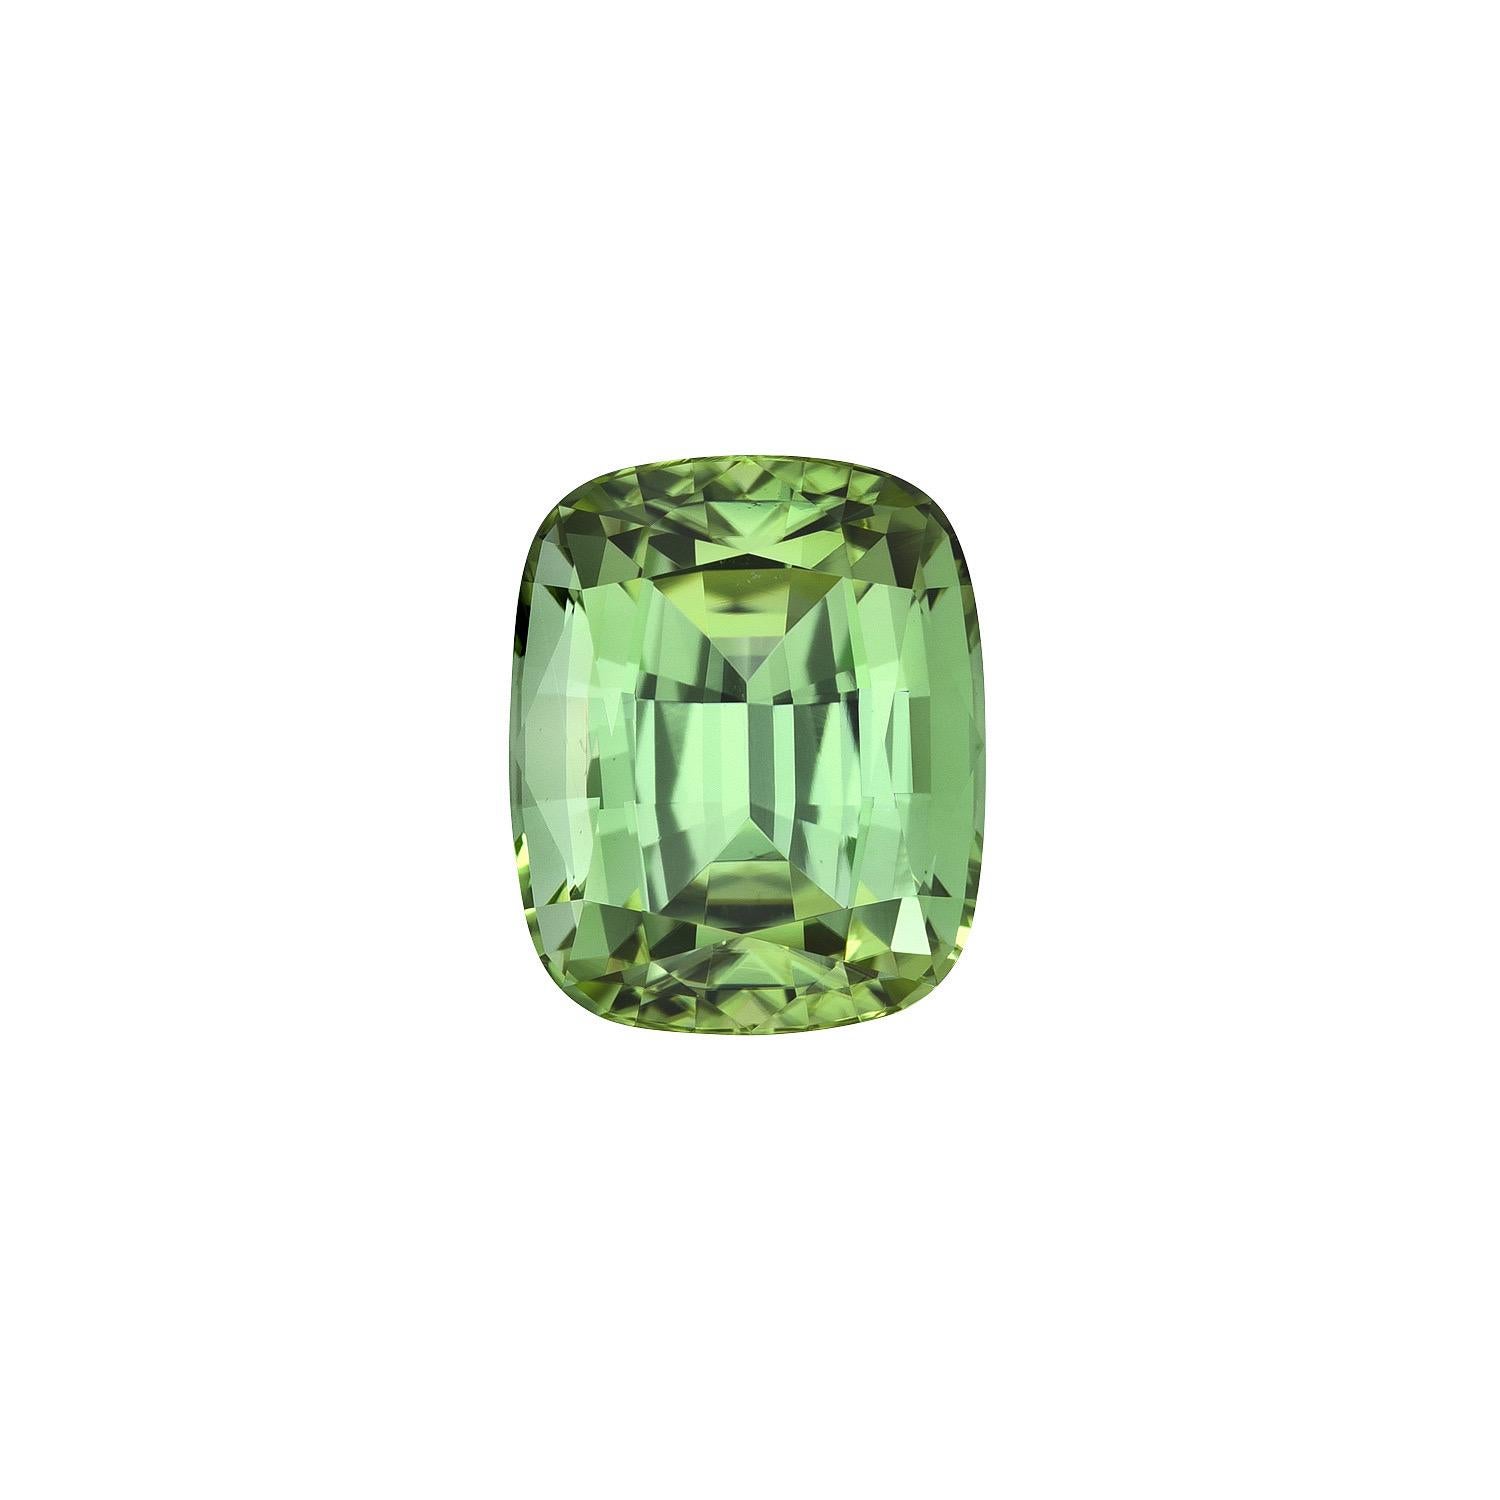 Fantastic 4.49 carat Mint Green Tourmaline cushion loose gemstone, offered unmounted to someone special.
Dimensions: 10.6 x 8.7 x 6.8 mm.
Returns are accepted and paid by us within 7 days of delivery.
We offer supreme custom jewelry work upon